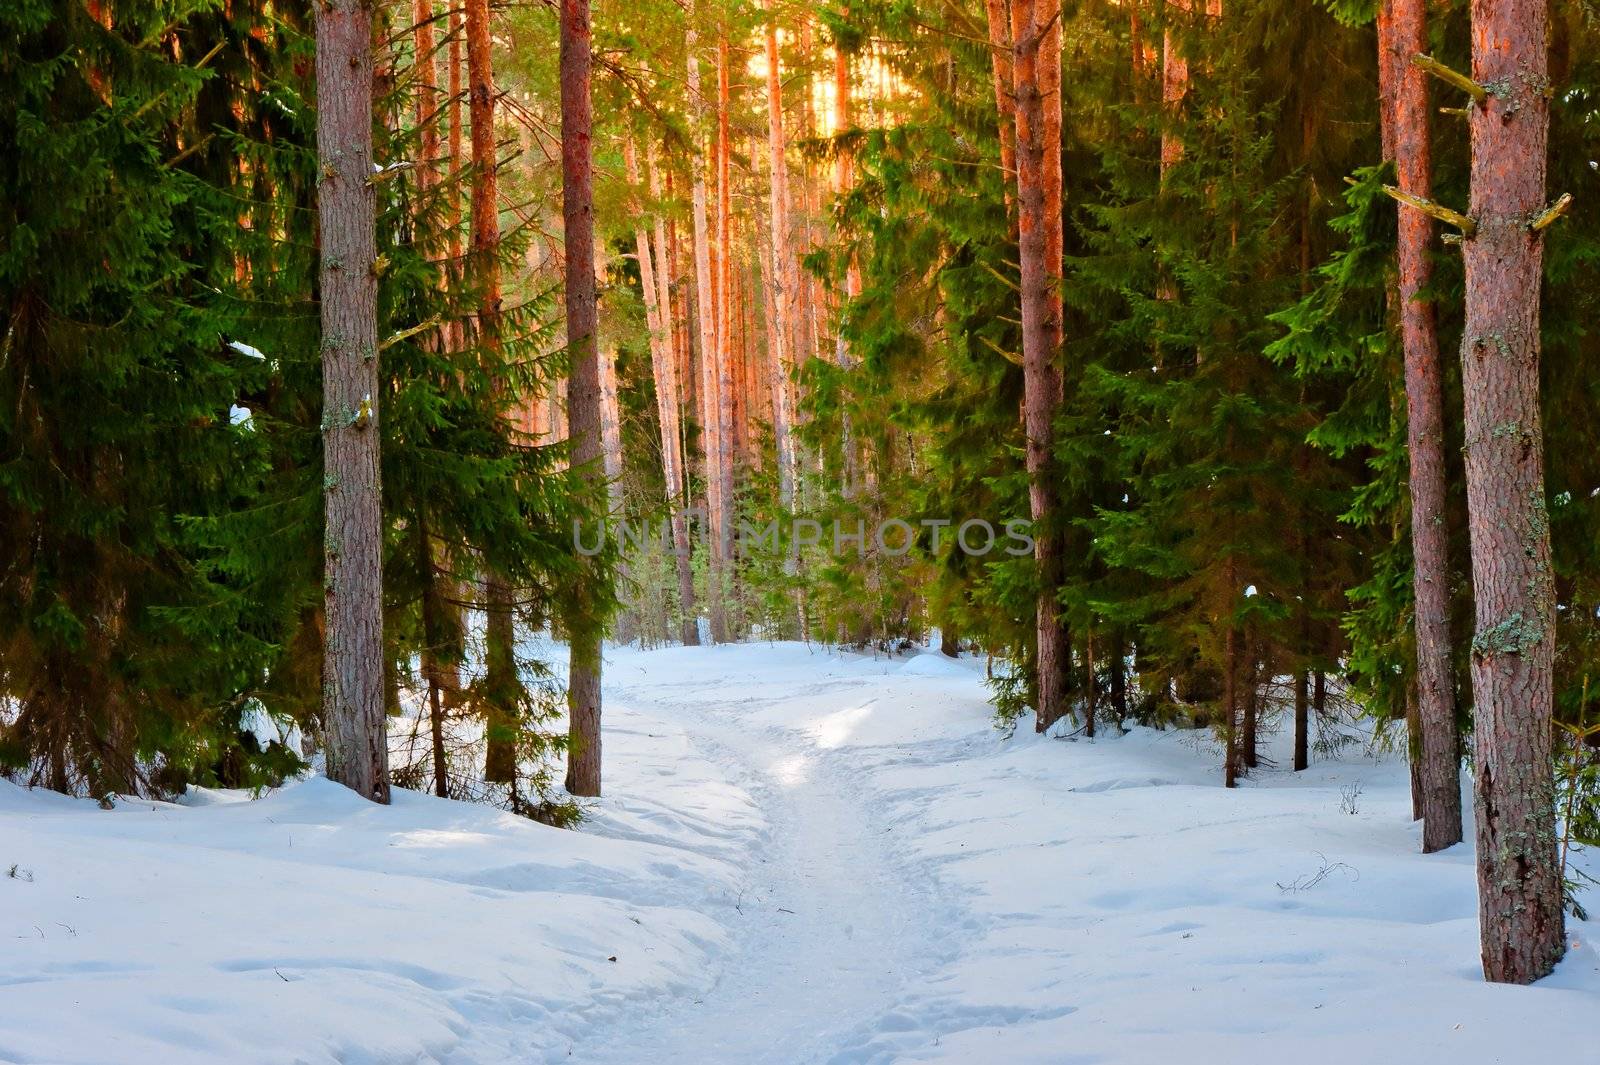 Snowy trail in the winter coniferous forest by kosmsos111